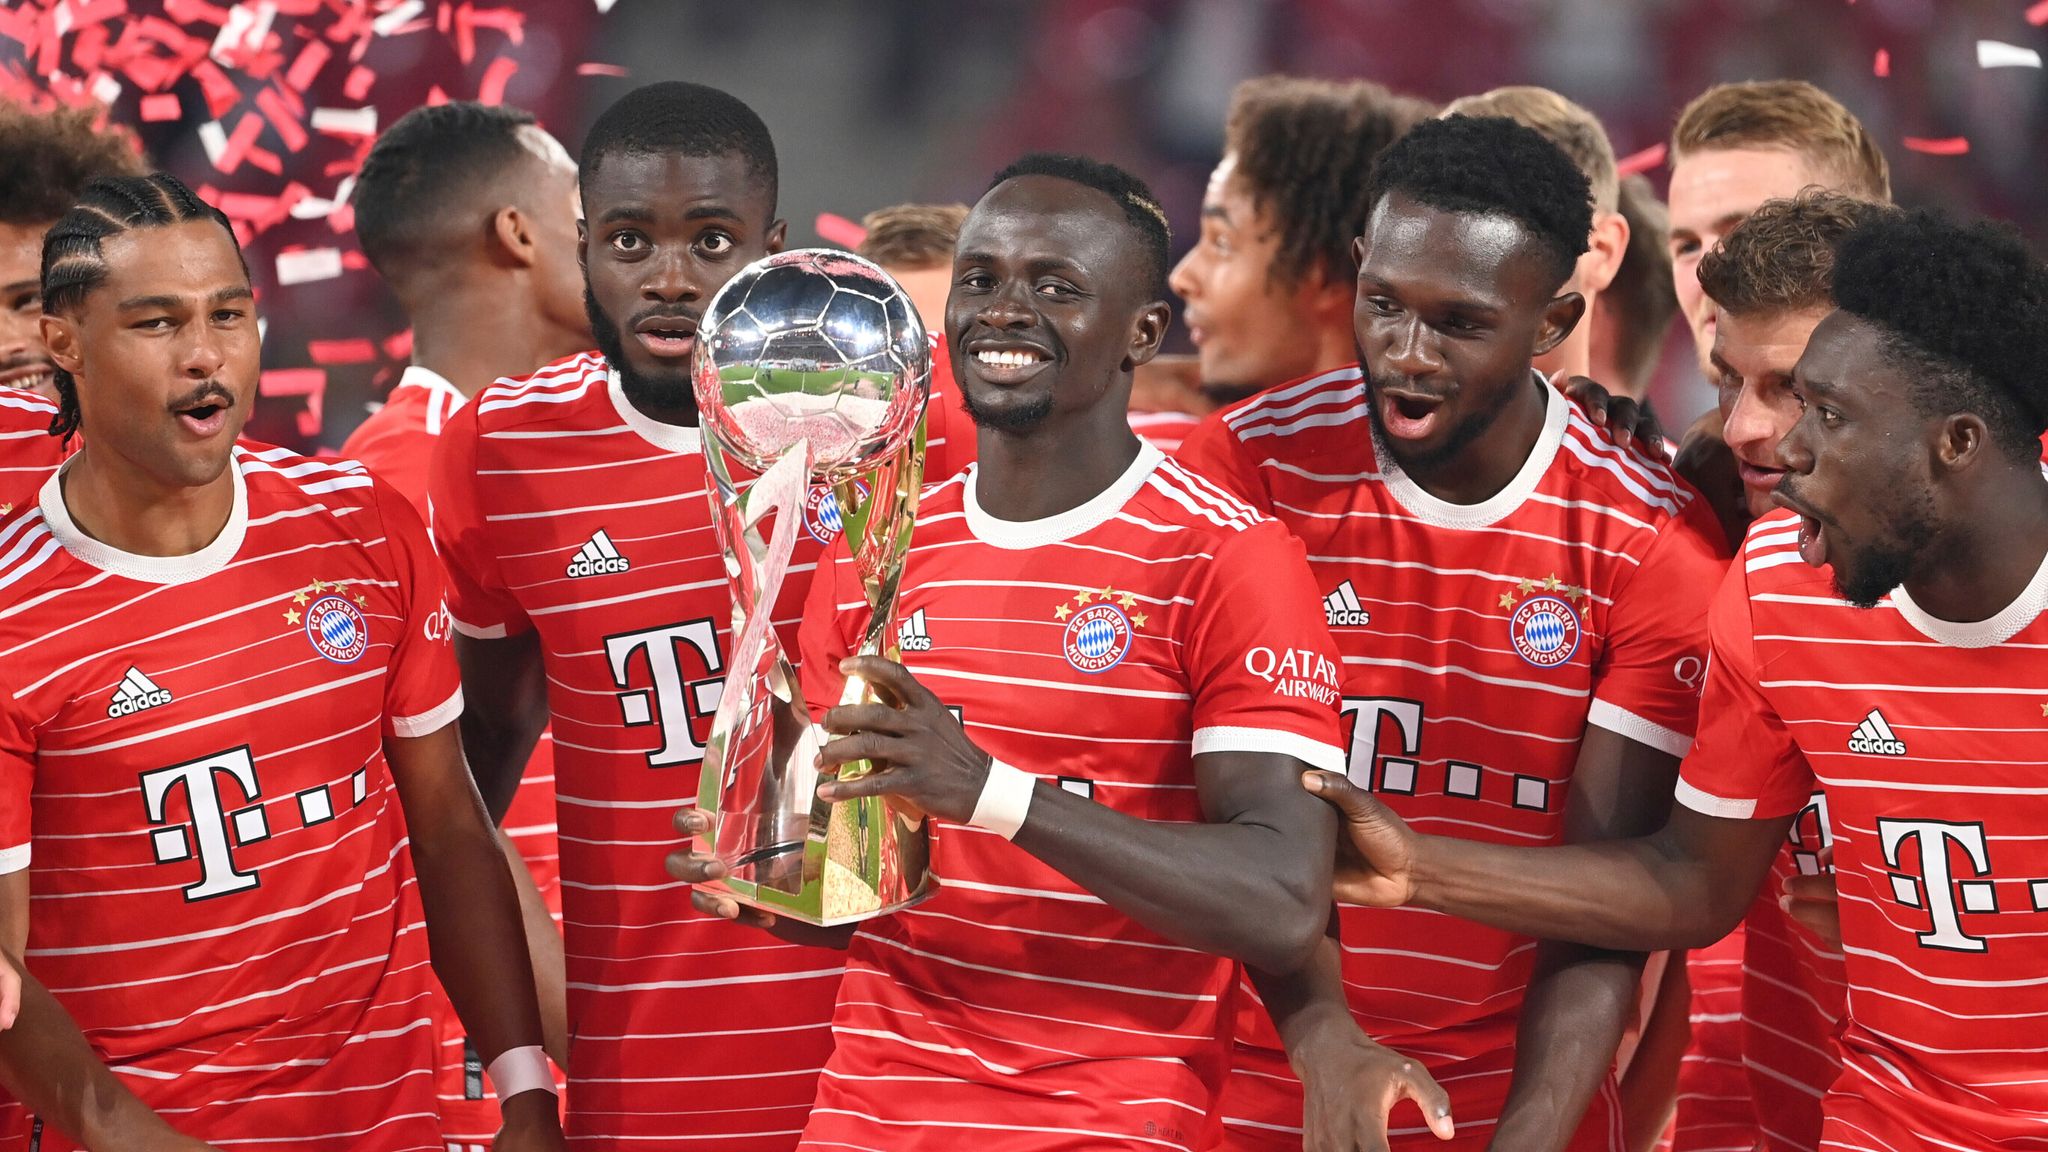 RB Leipzig vs Bayern Munich: Match Preview and Expert Football Predictions